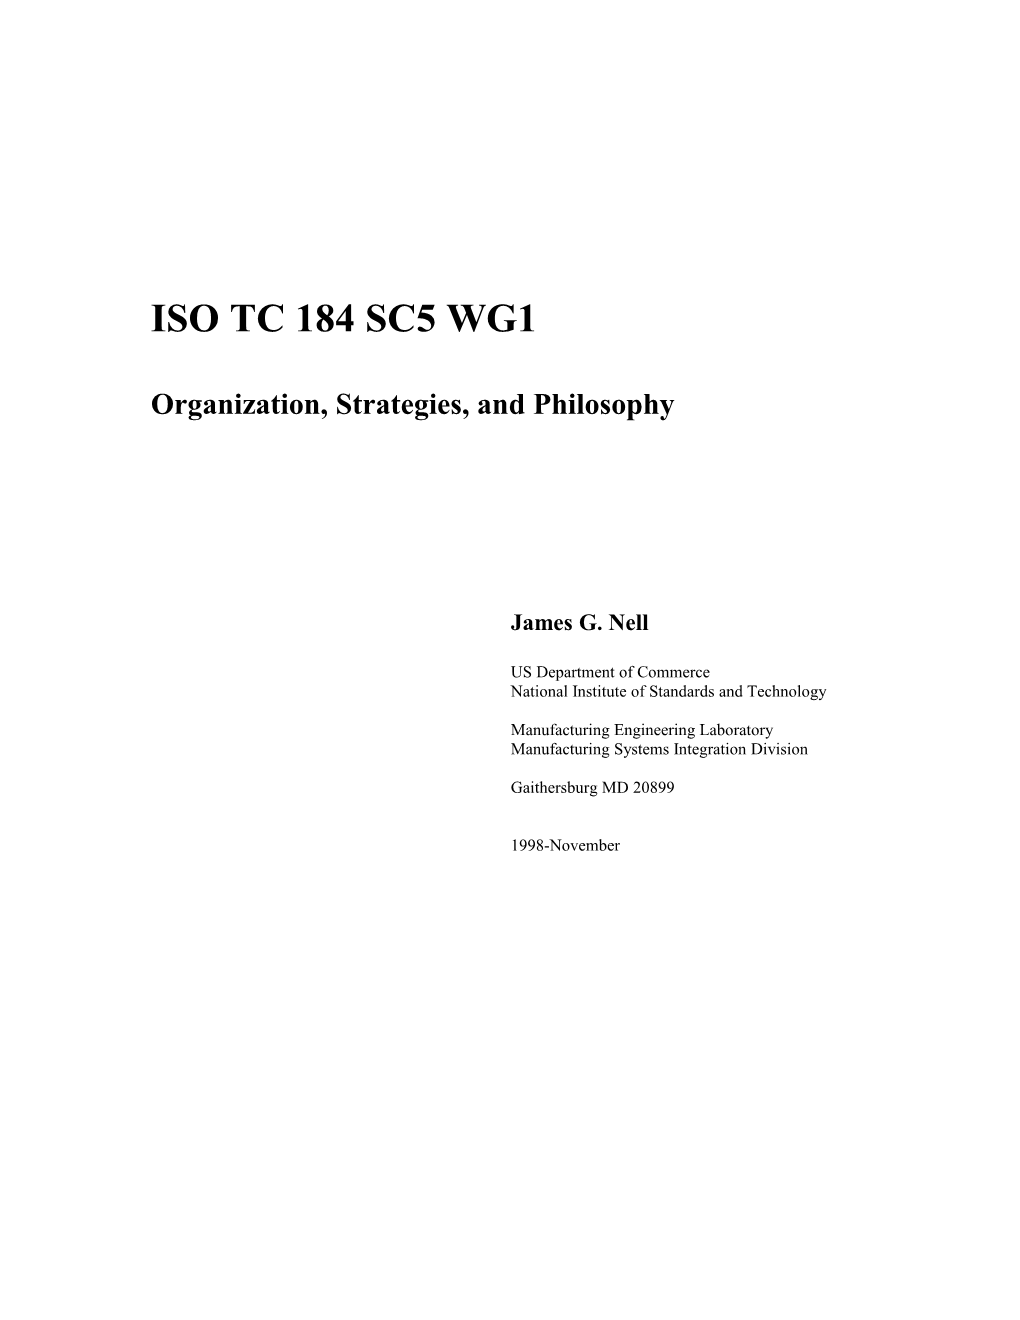 ISO TC 184 SC5 WG1, Overview of Organization and Activities